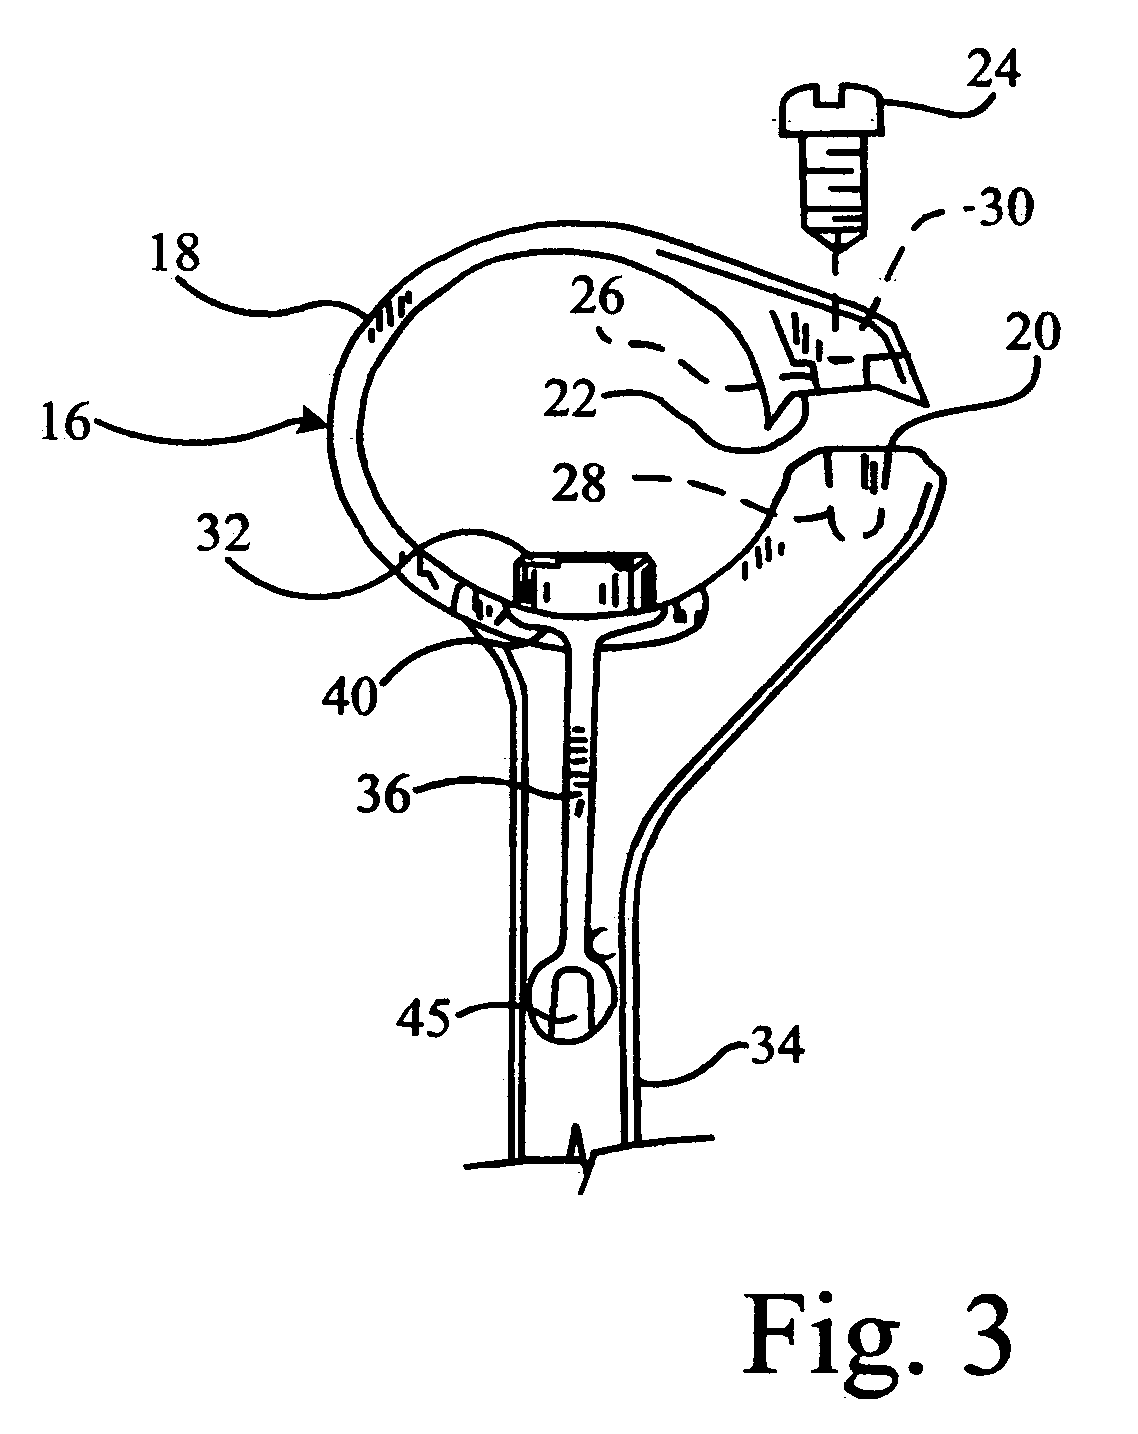 Multi-prong conversion tine for a harvester reel and method